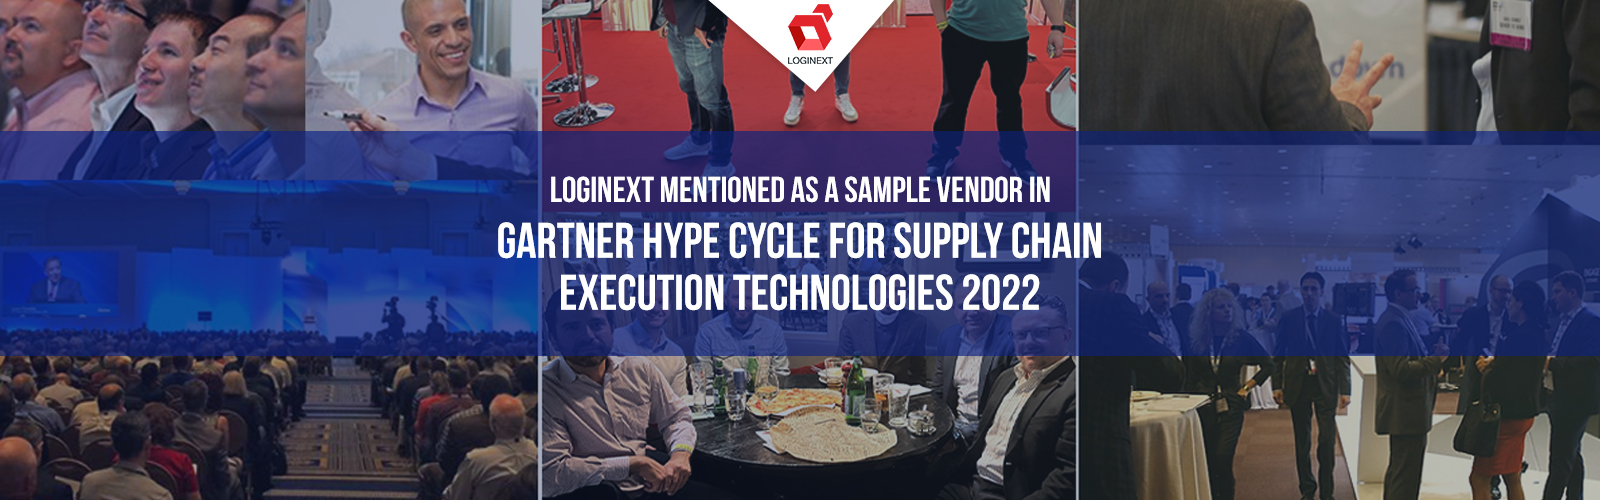 LogiNext mentioned as a Sample Vendor in Gartner® Hype Cycle™ for Supply Chain Execution Technologies, 2022